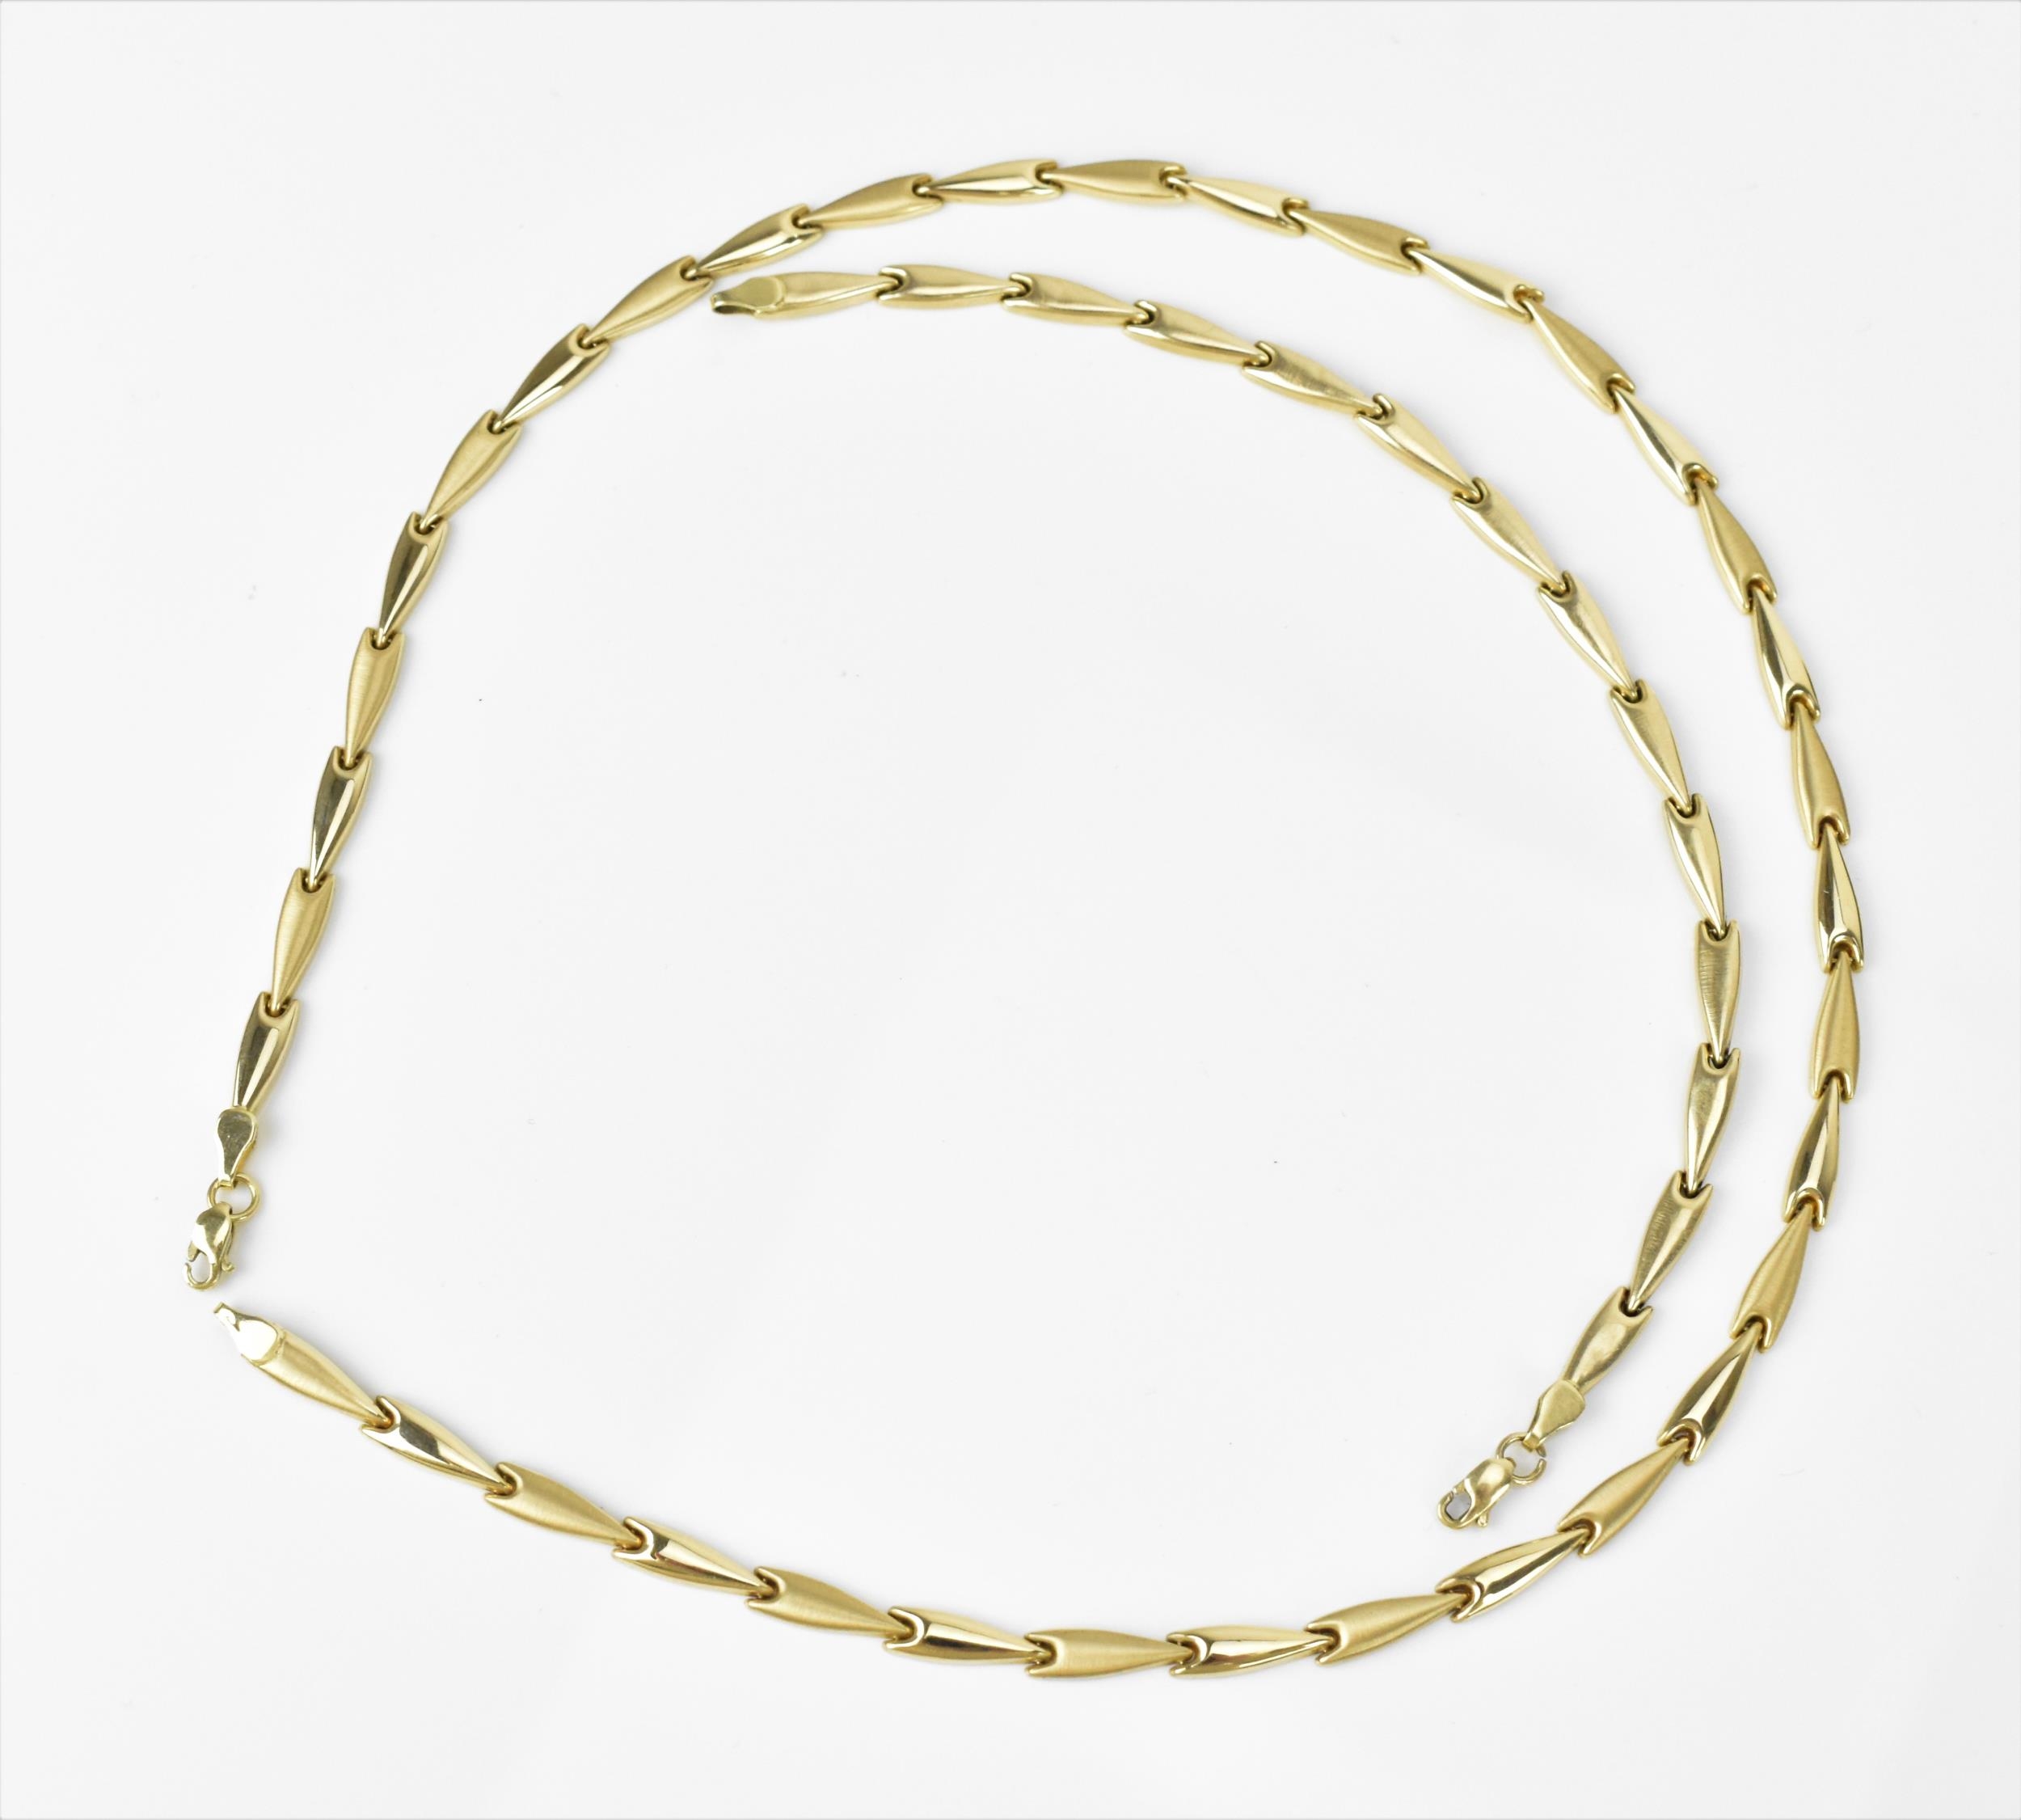 A 14ct yellow gold matching necklace and bracelet, with arrow style links alternating in satin and